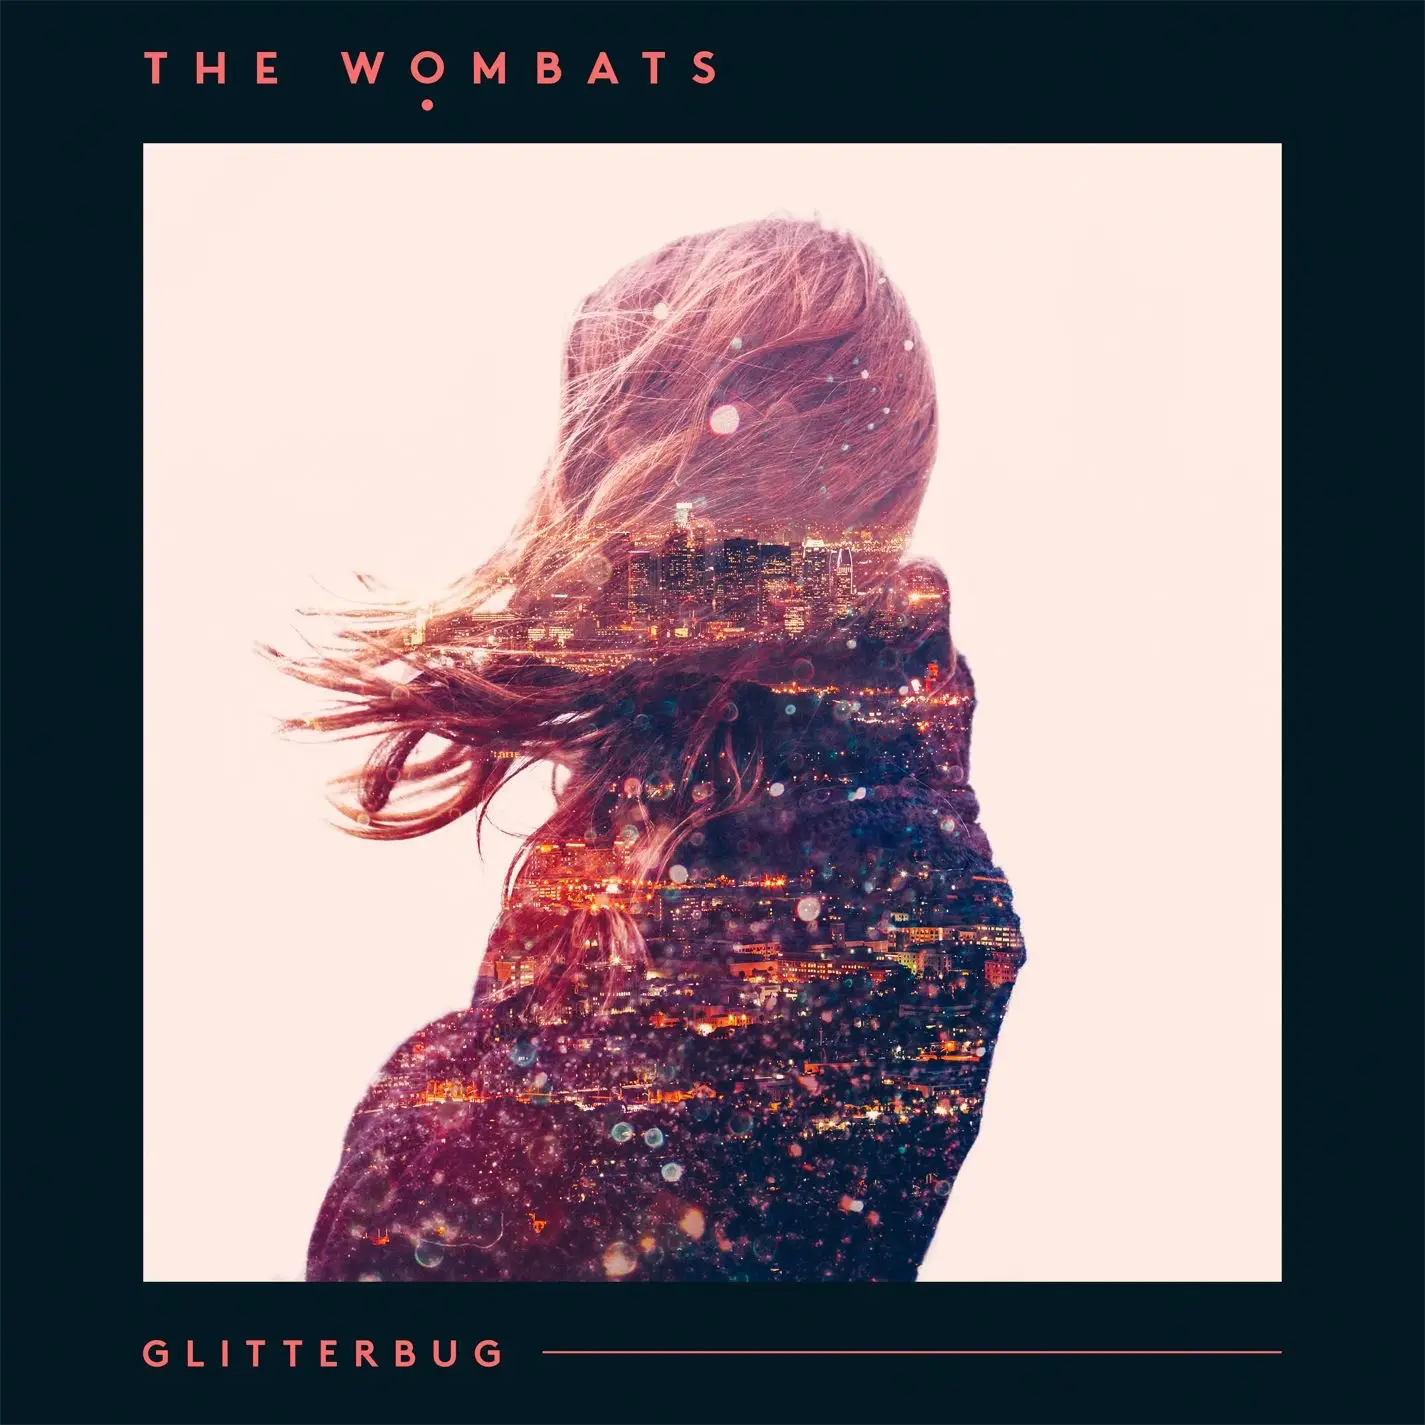 <strong>The Wombats - Glitterbug</strong> (Vinyl LP - clear)